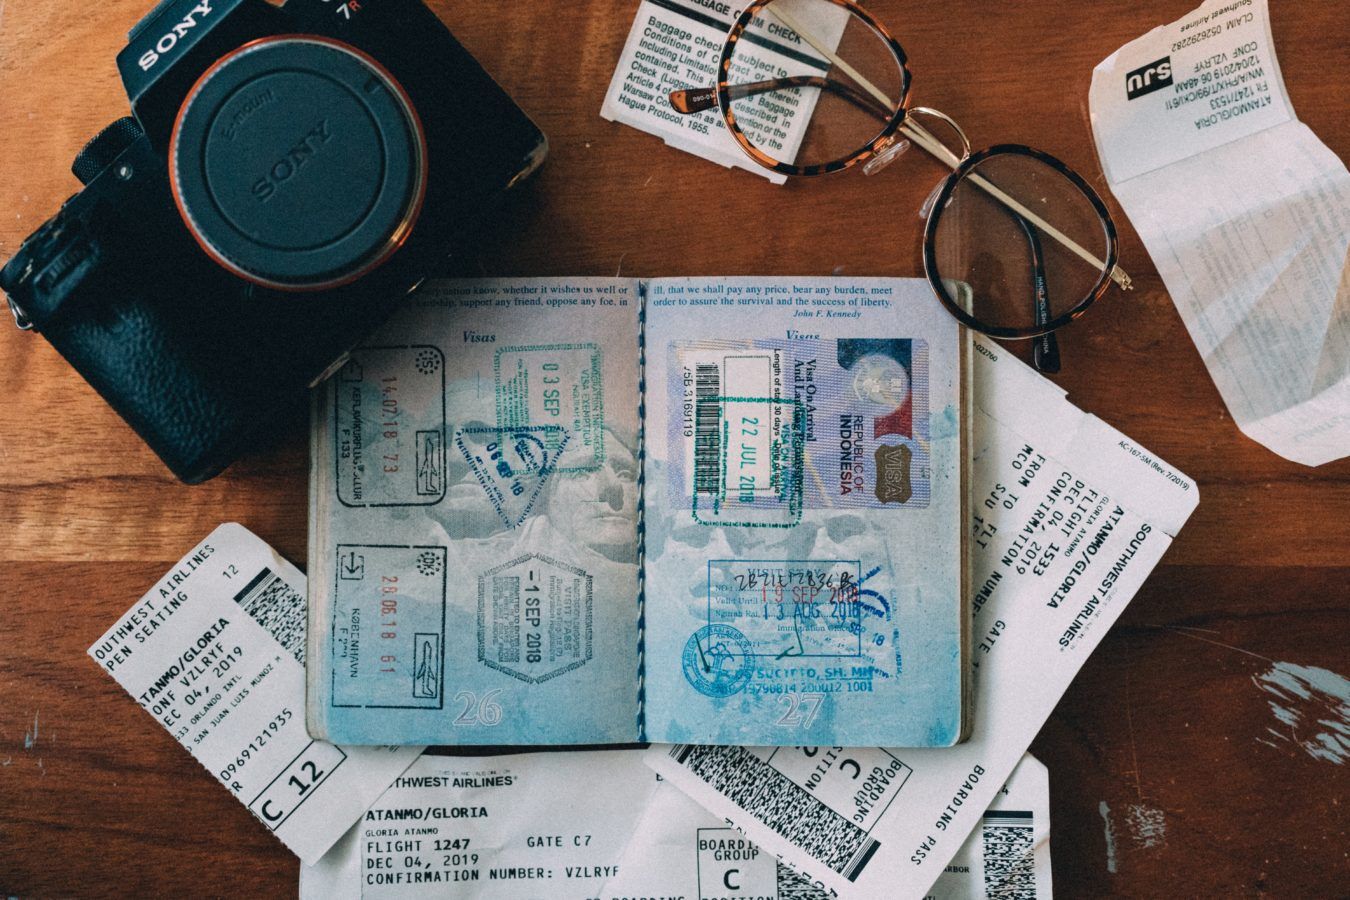 4 things to know if you wish to renew your Malaysian passport